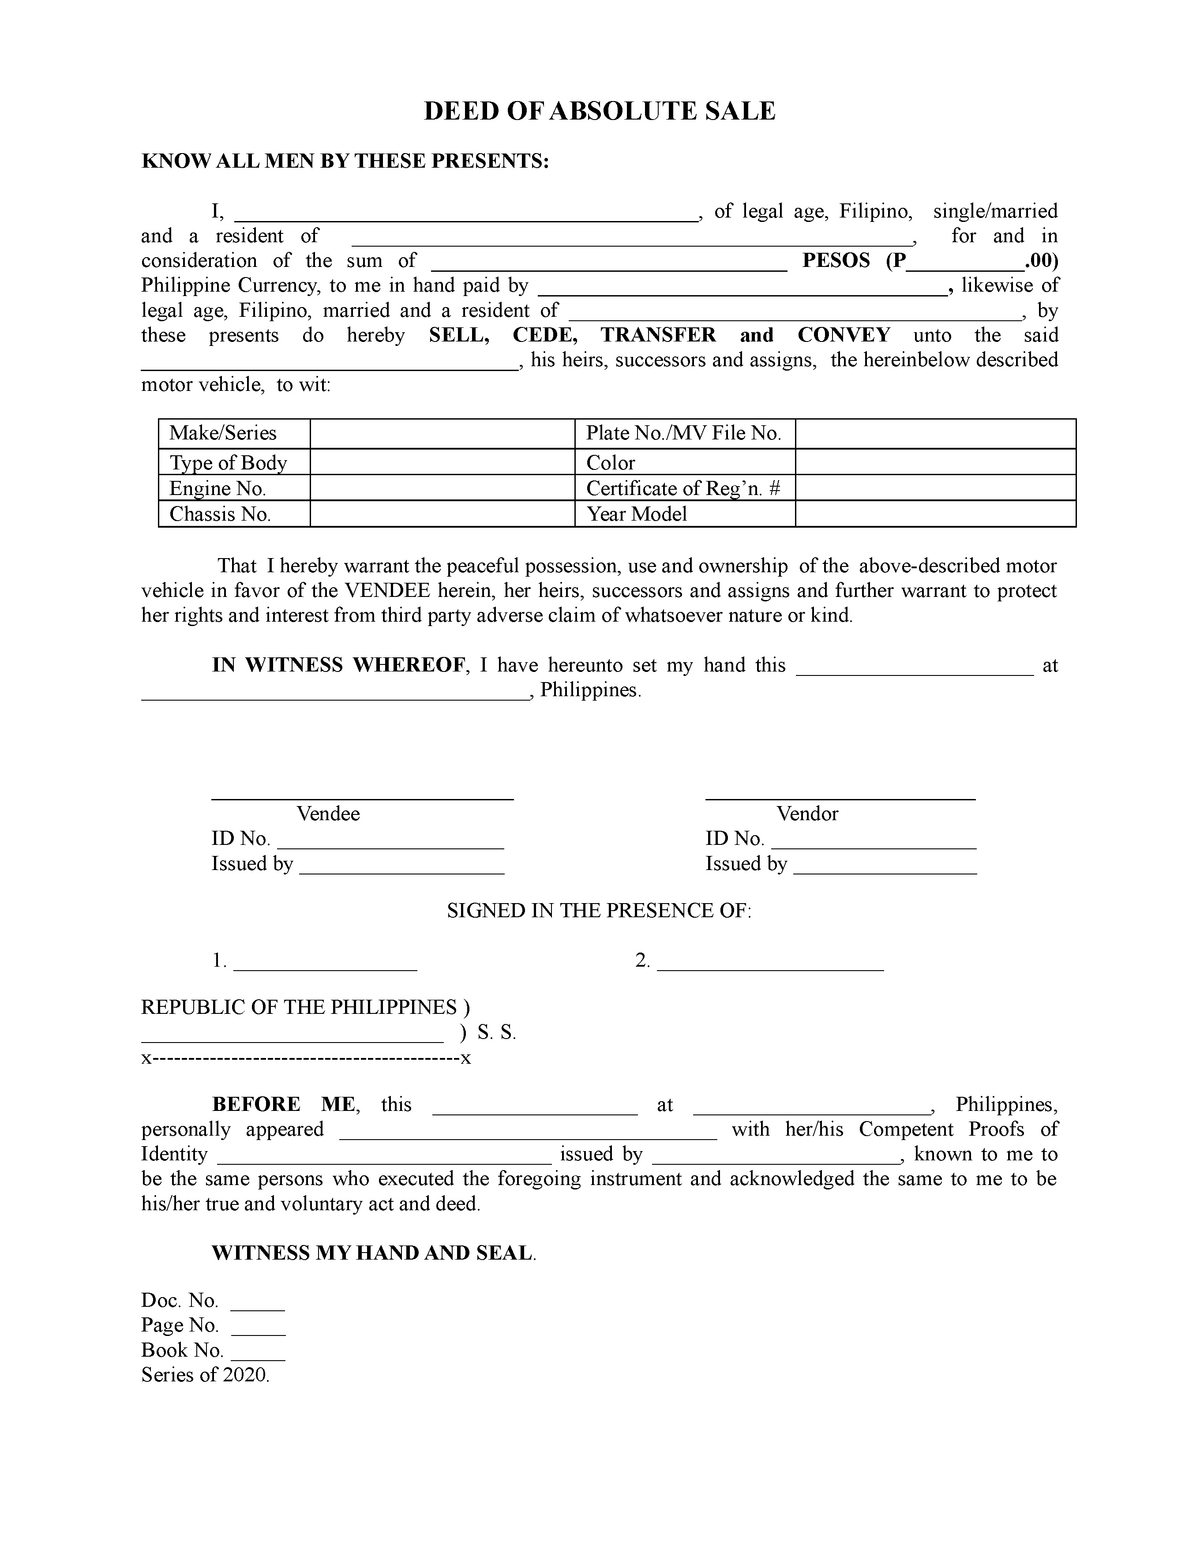 deed of assignment of motor vehicle philippines